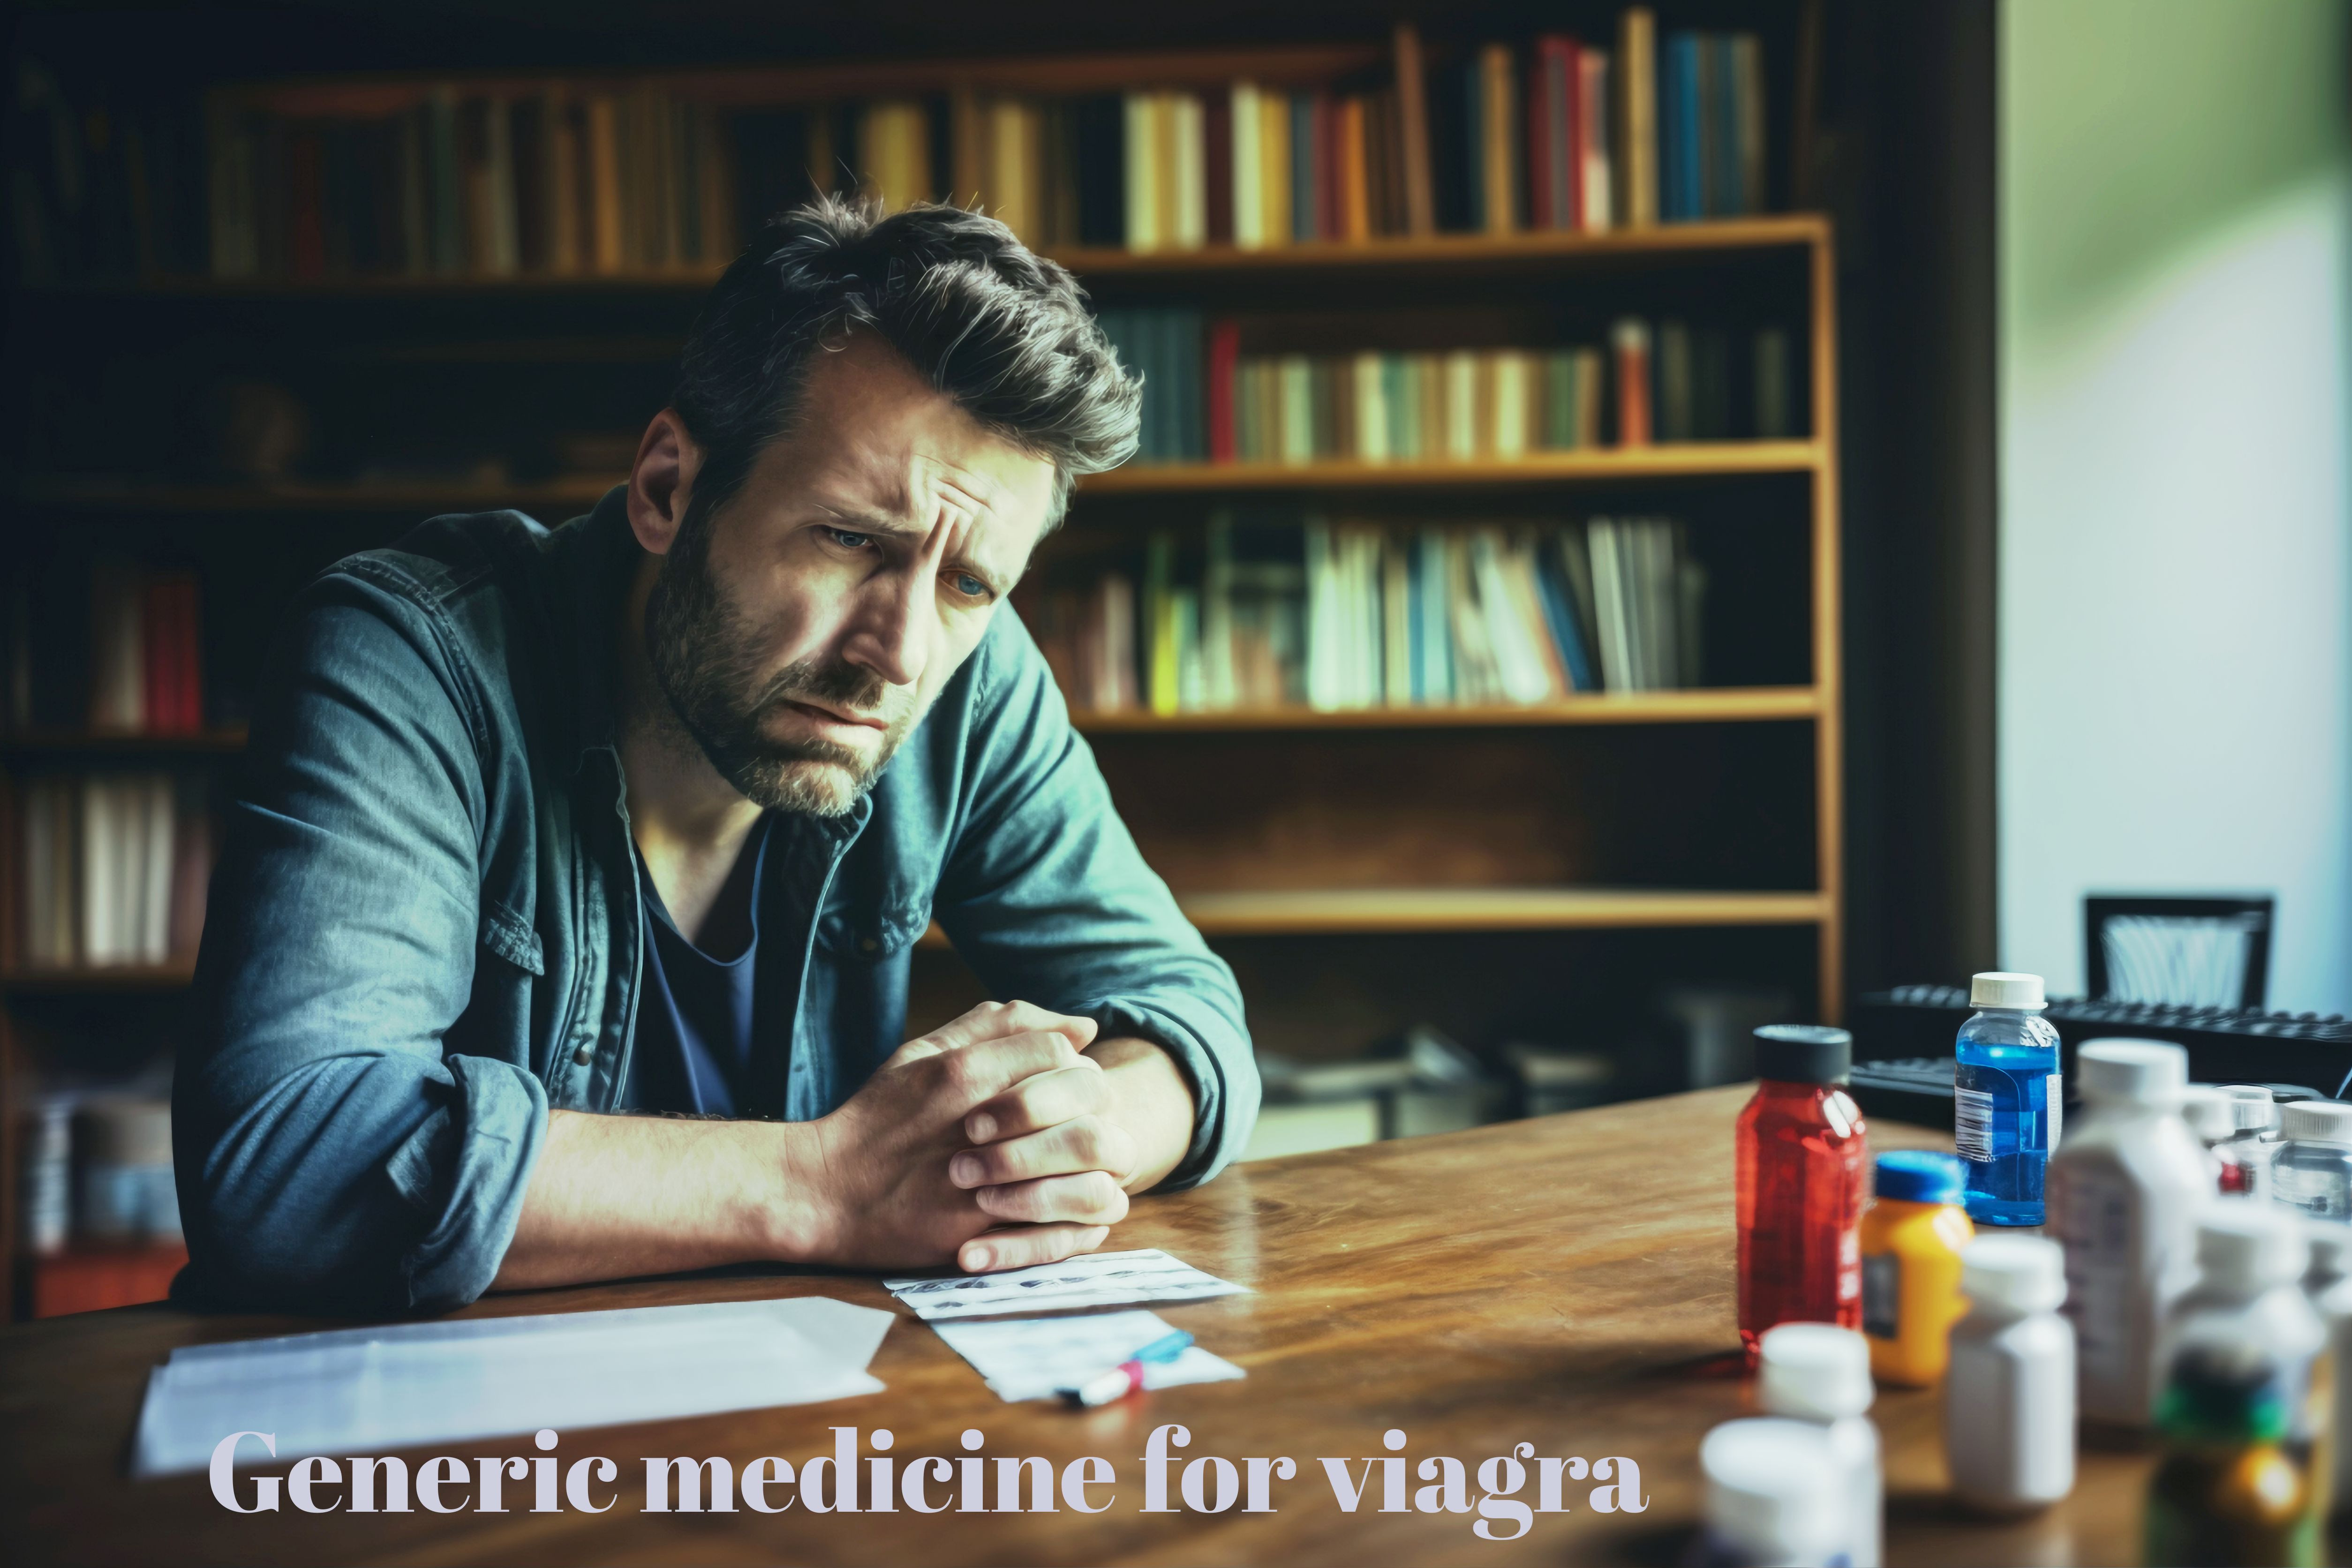 Why Are Generic Medicines for Viagra Gaining Popularity Among Consumers?